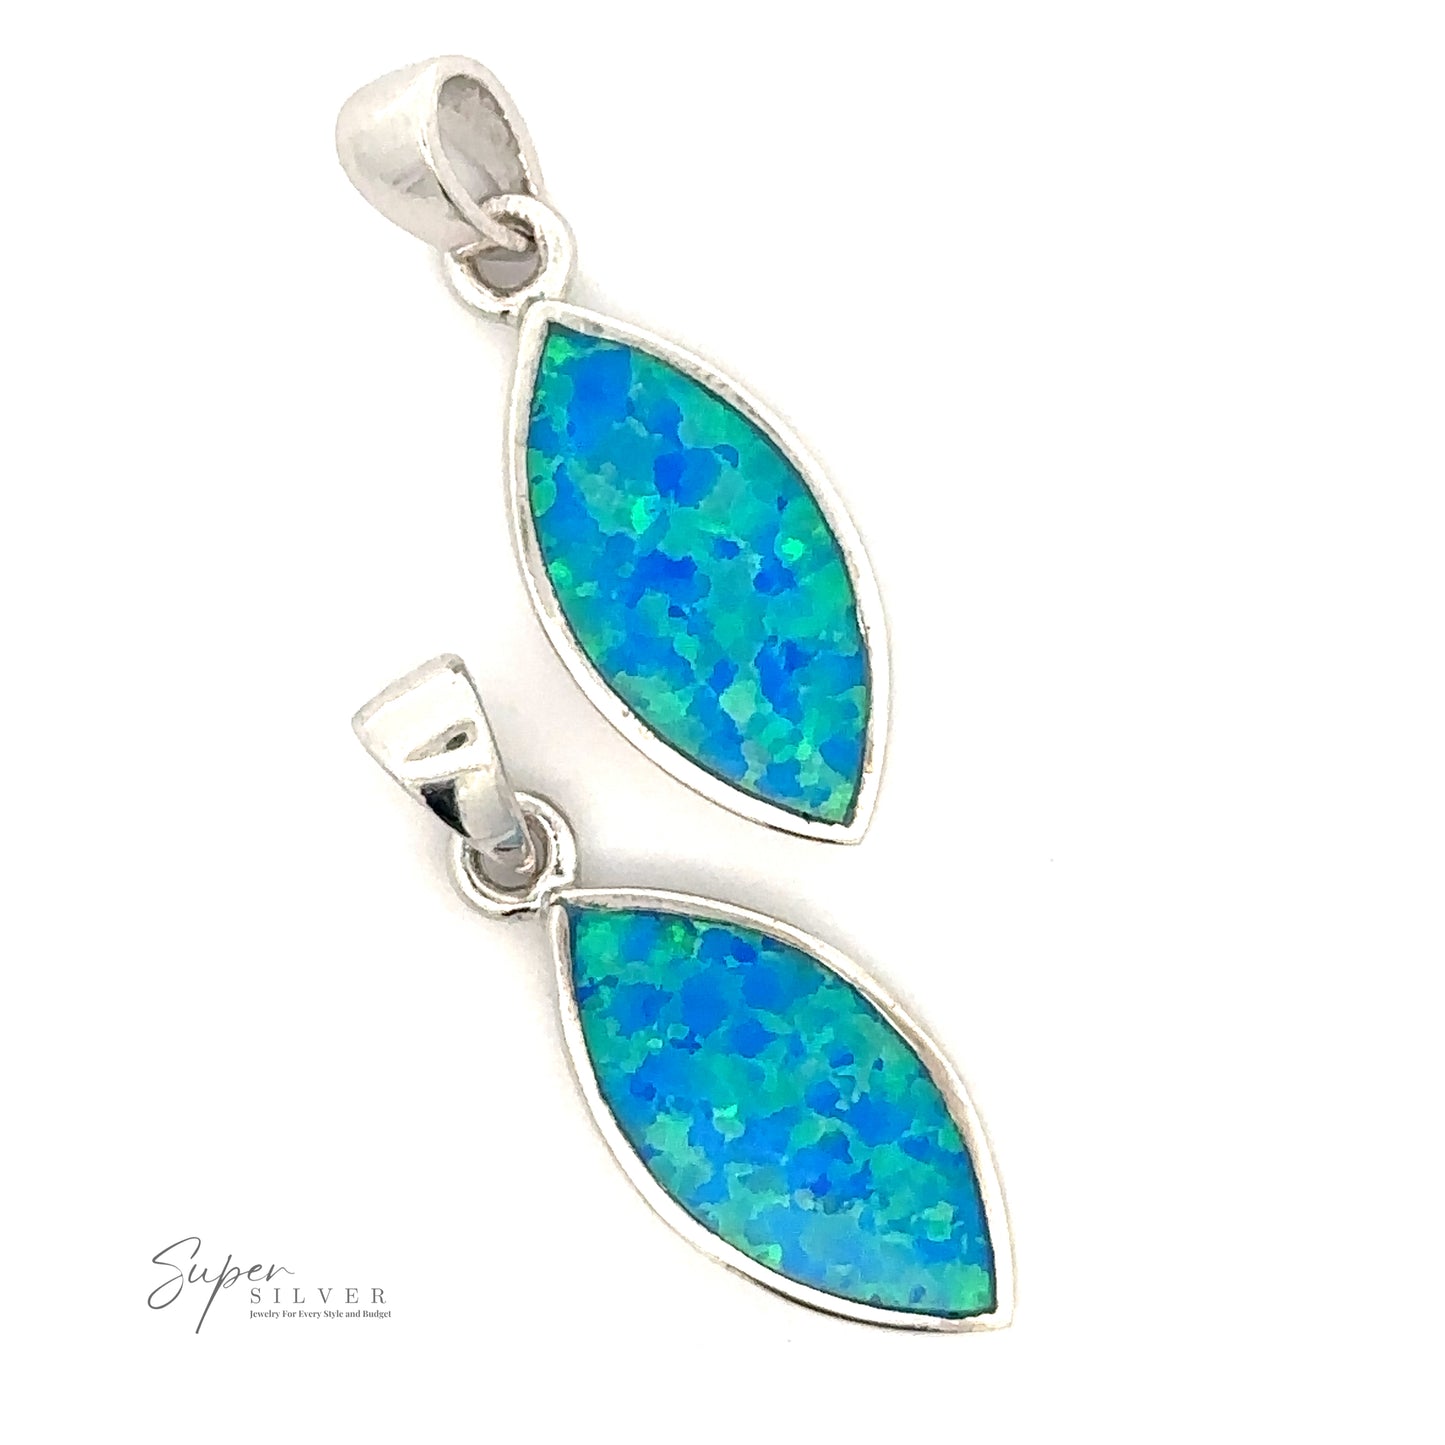 
                  
                    Two Marquise-Shaped Blue Opal Pendants with iridescent blue and green stones set in rhodium plated sterling silver frames, displayed against a white background. "Super Silver" branding is visible in the bottom left corner.
                  
                